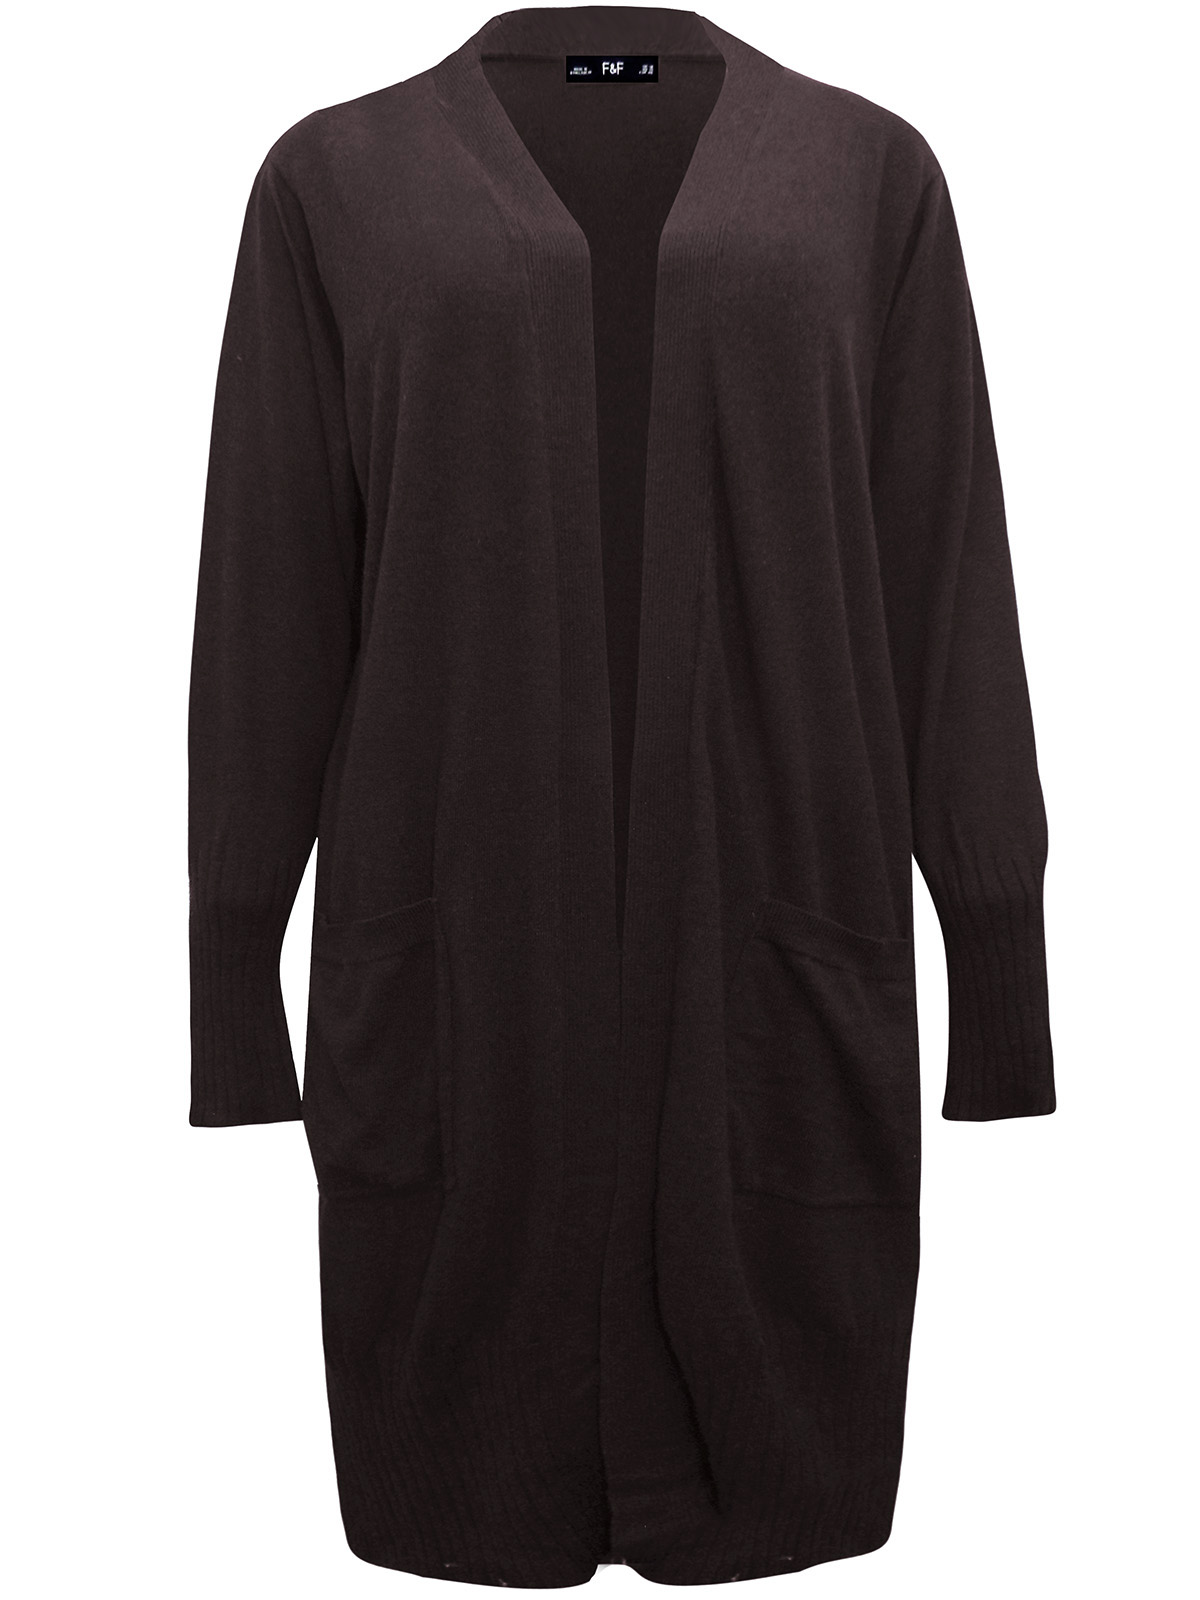 F&F - - F&F COFFEE Longline Open Front Cardigan - Plus Size 18 to 22